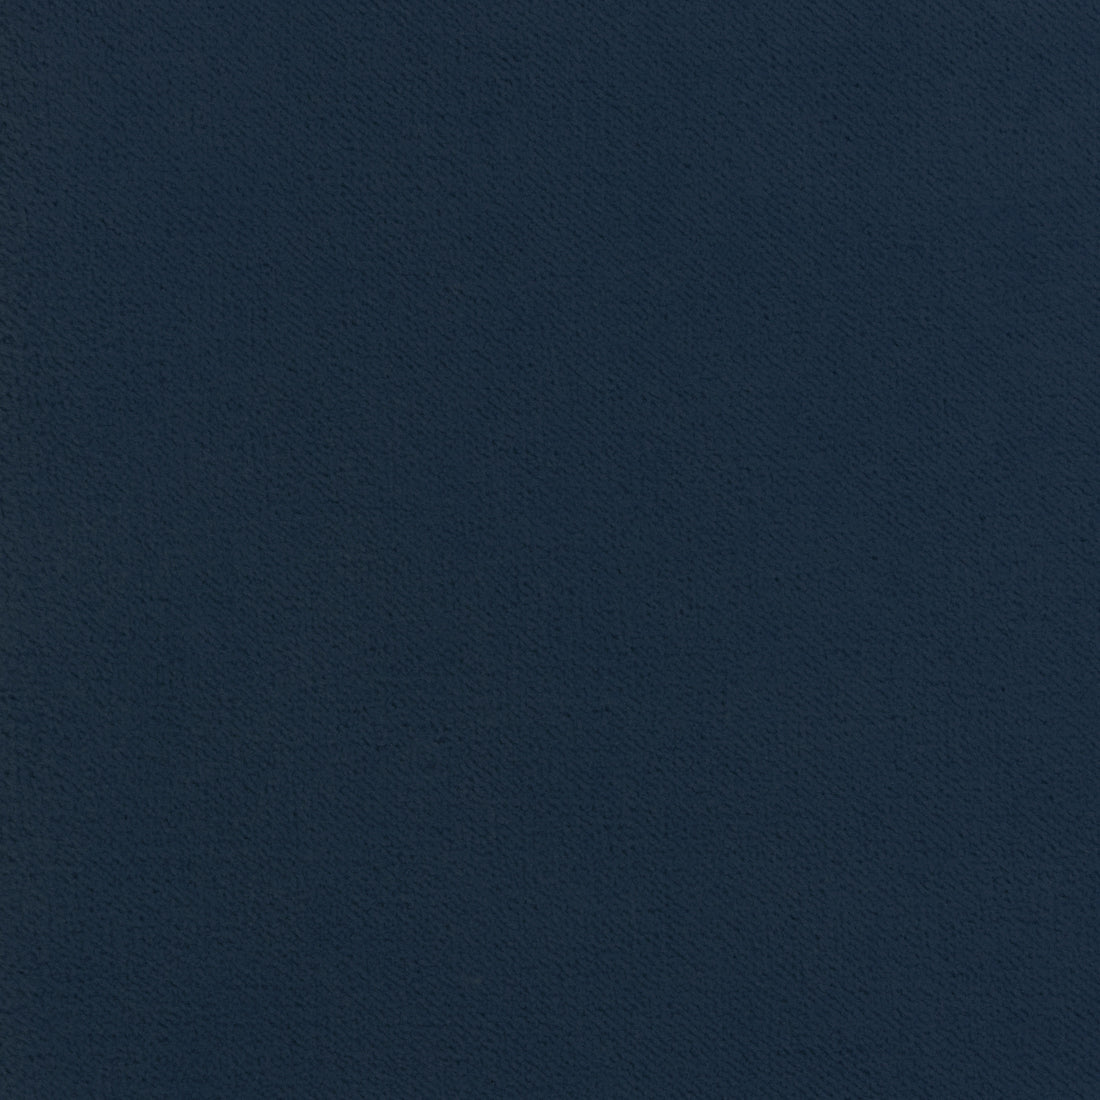 Club Velvet fabric in indigo color - pattern number W7236 - by Thibaut in the Club Velvet collection